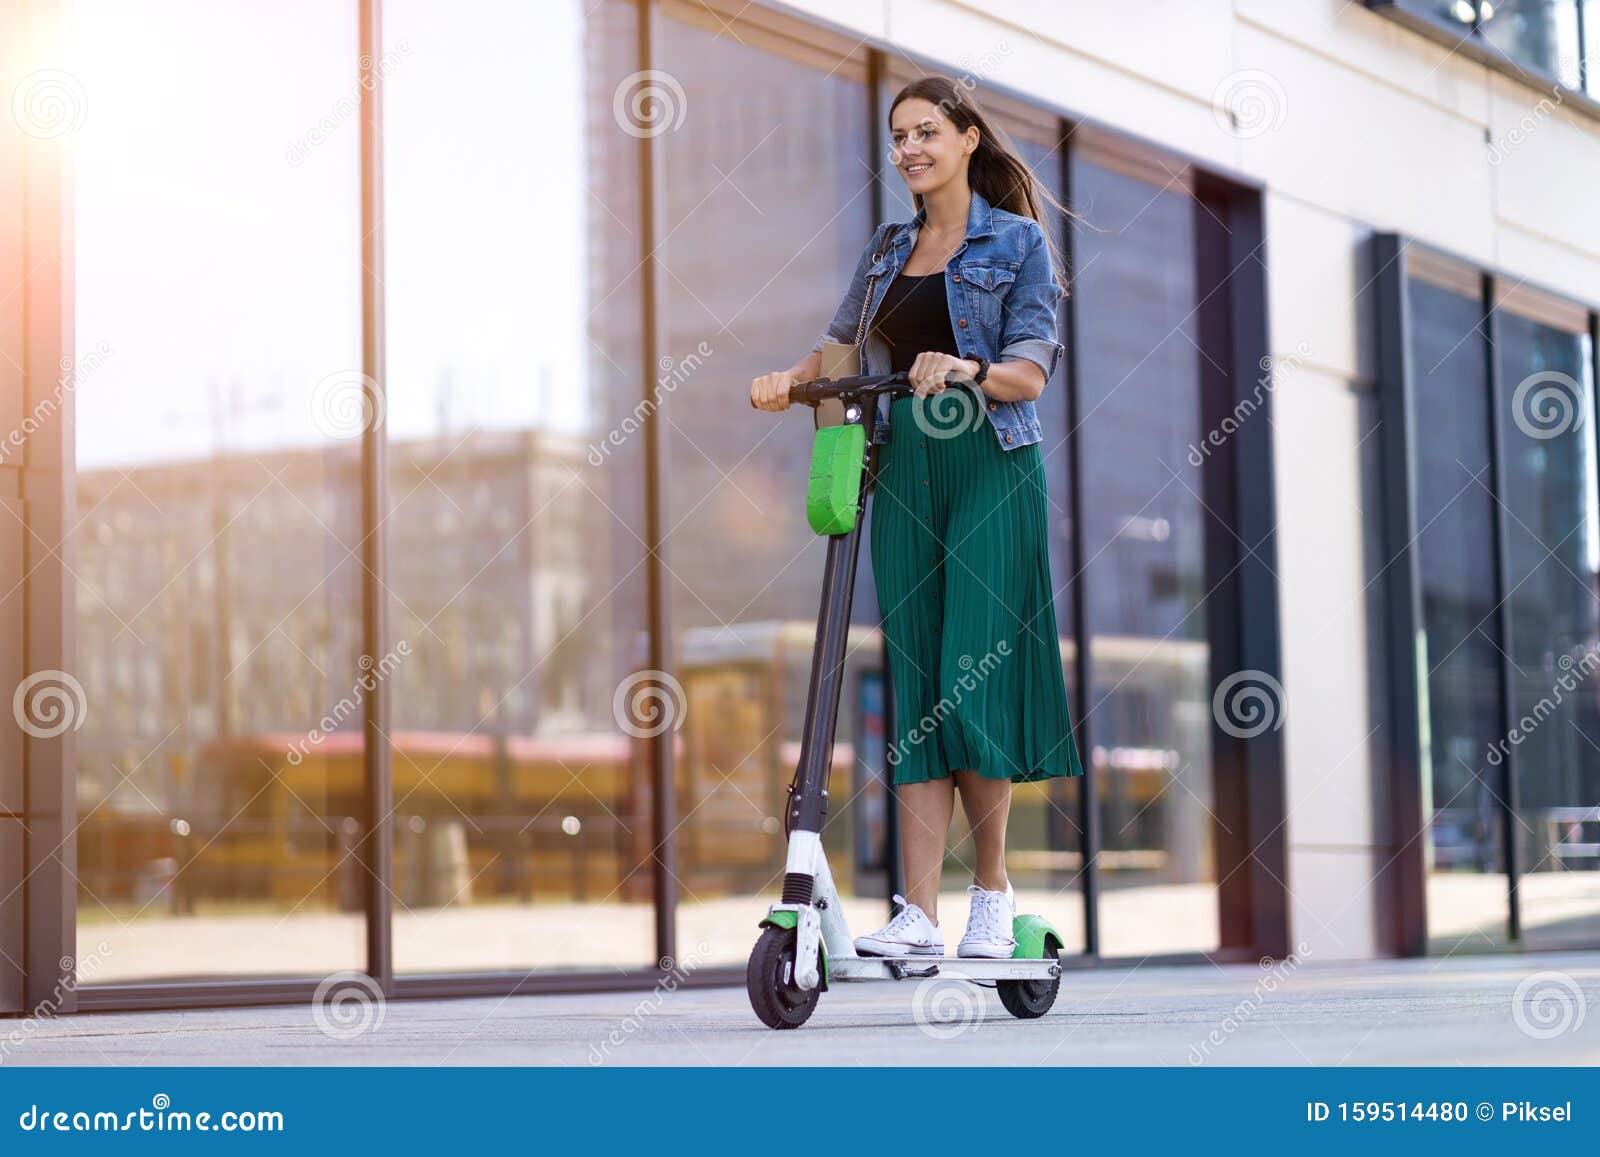 female commuter riding electric push scooter